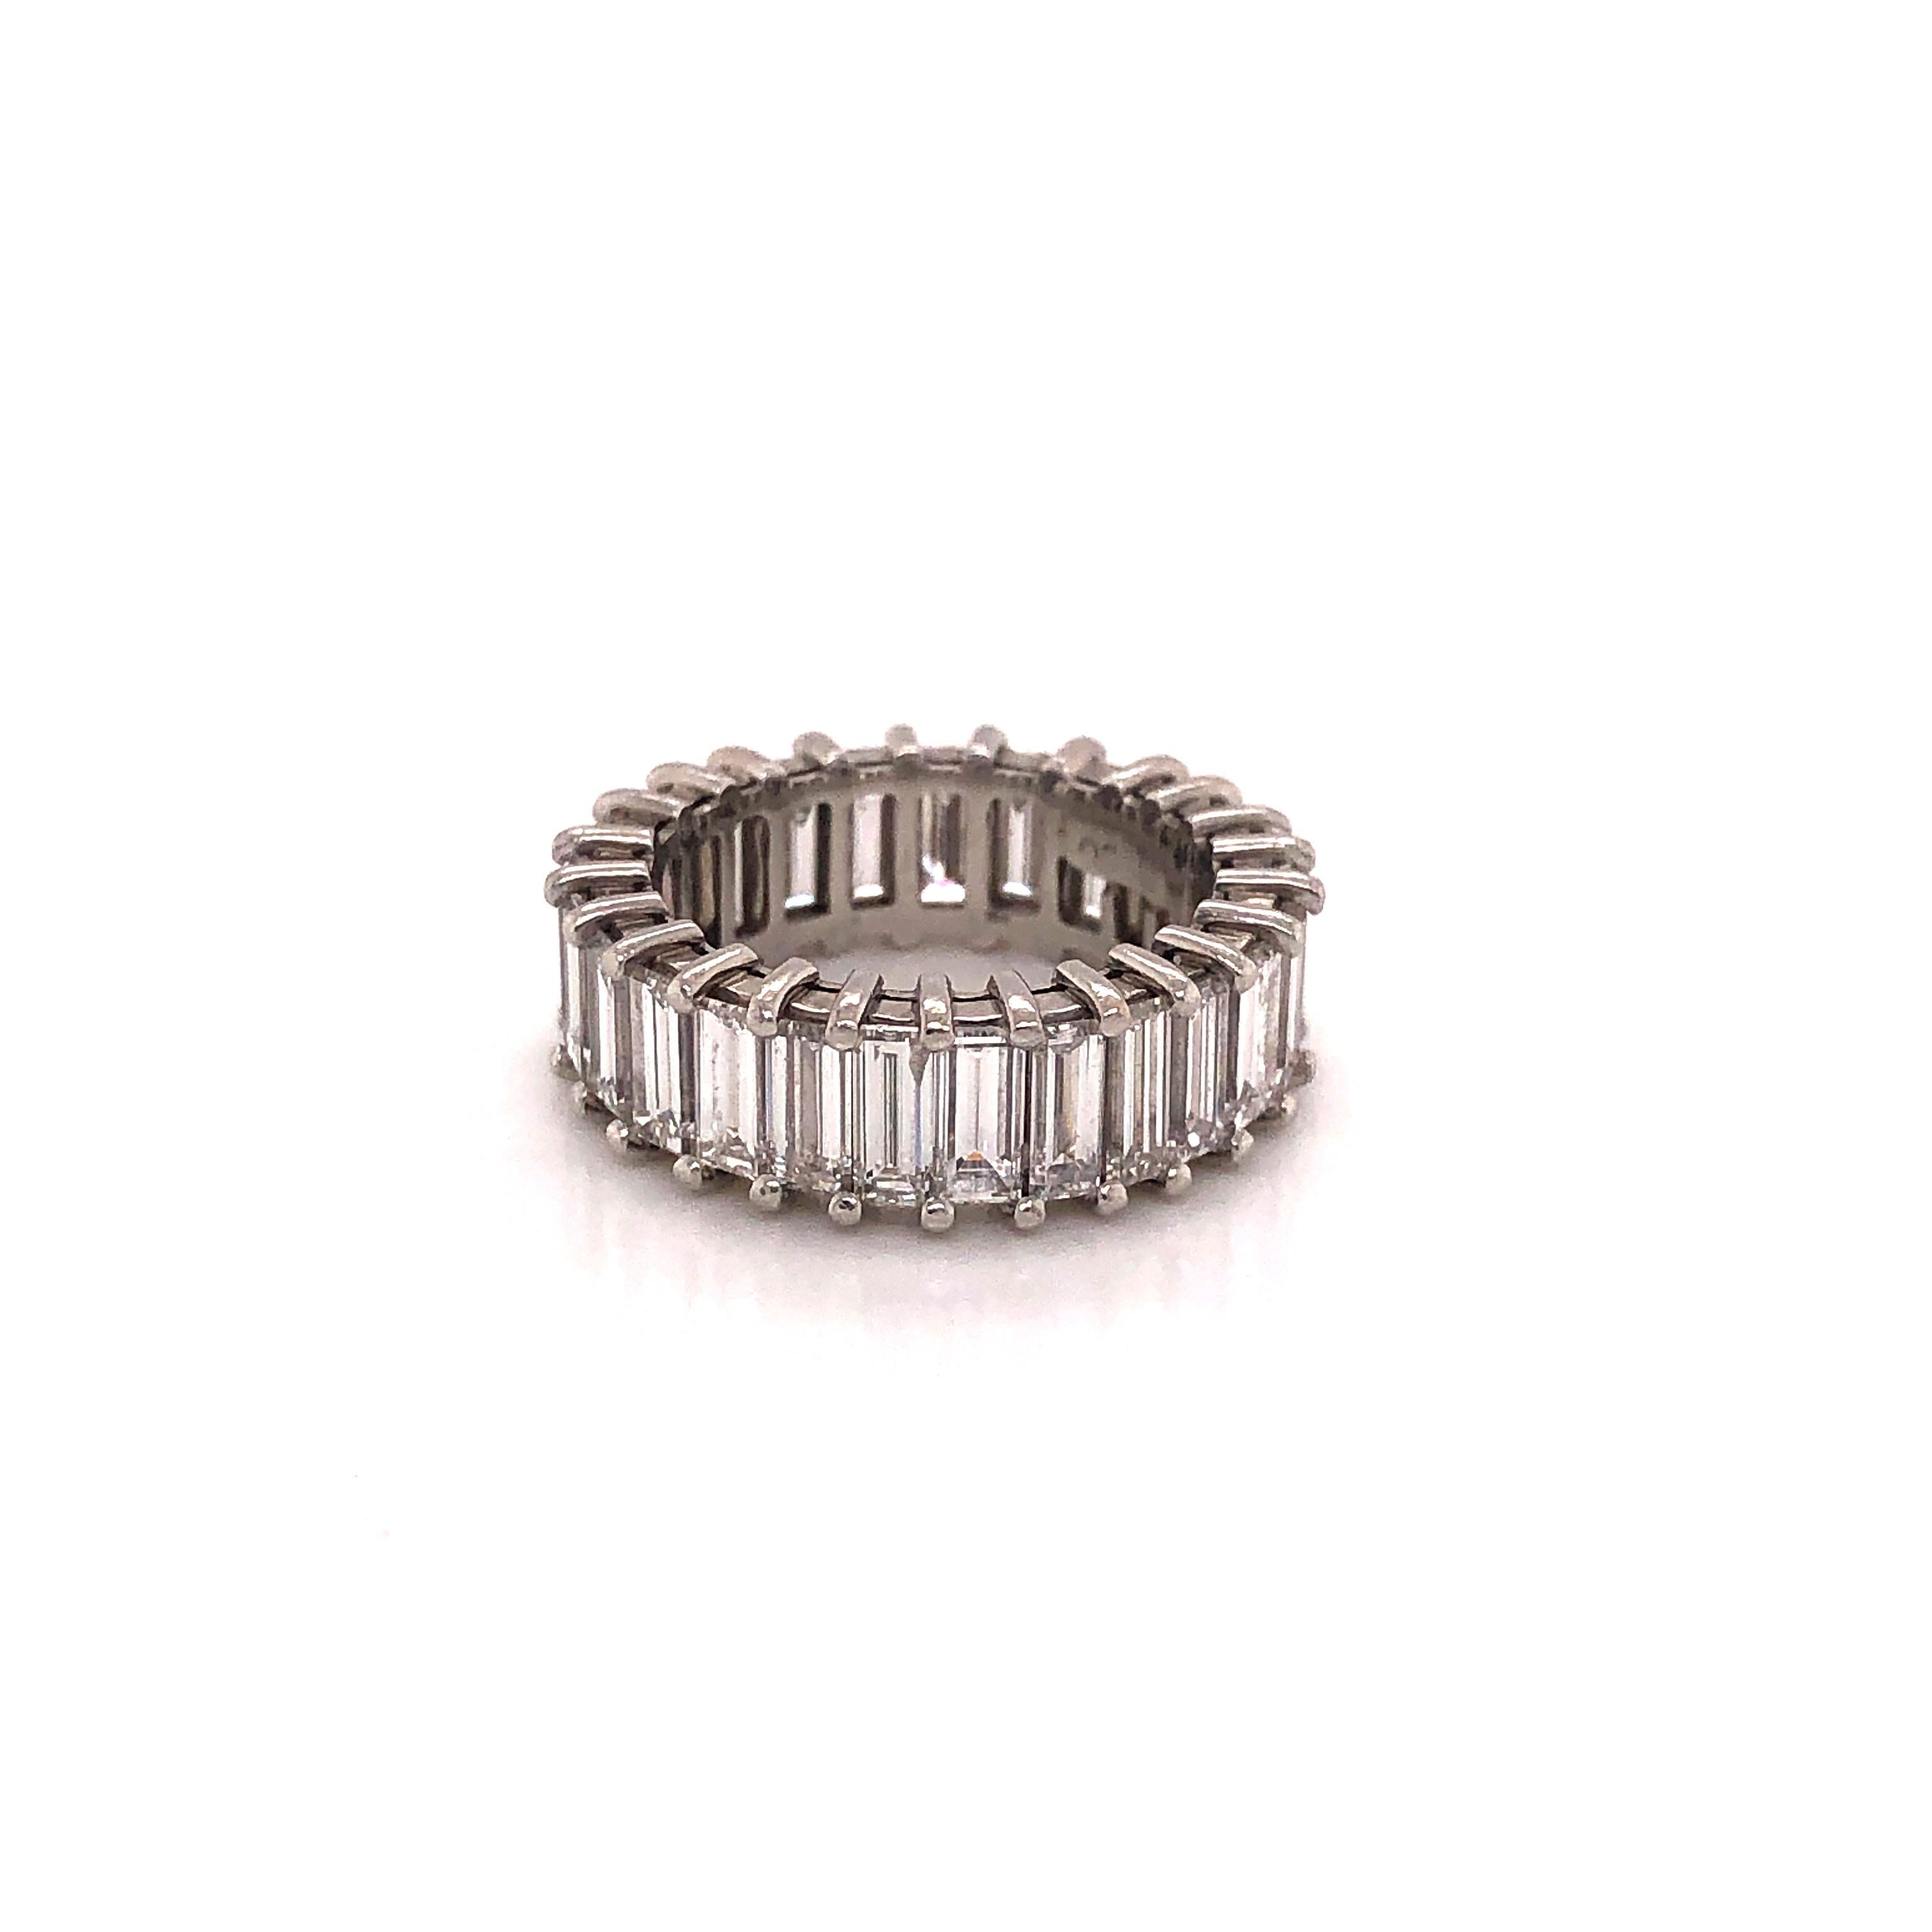 Amazing design on this platinum eternity band. All natural baguette diamonds were sourced to create this one of a kind look. These elongated baguette diamonds are all VS quality and white in color. Each diamond in this ring weighs approximately .25